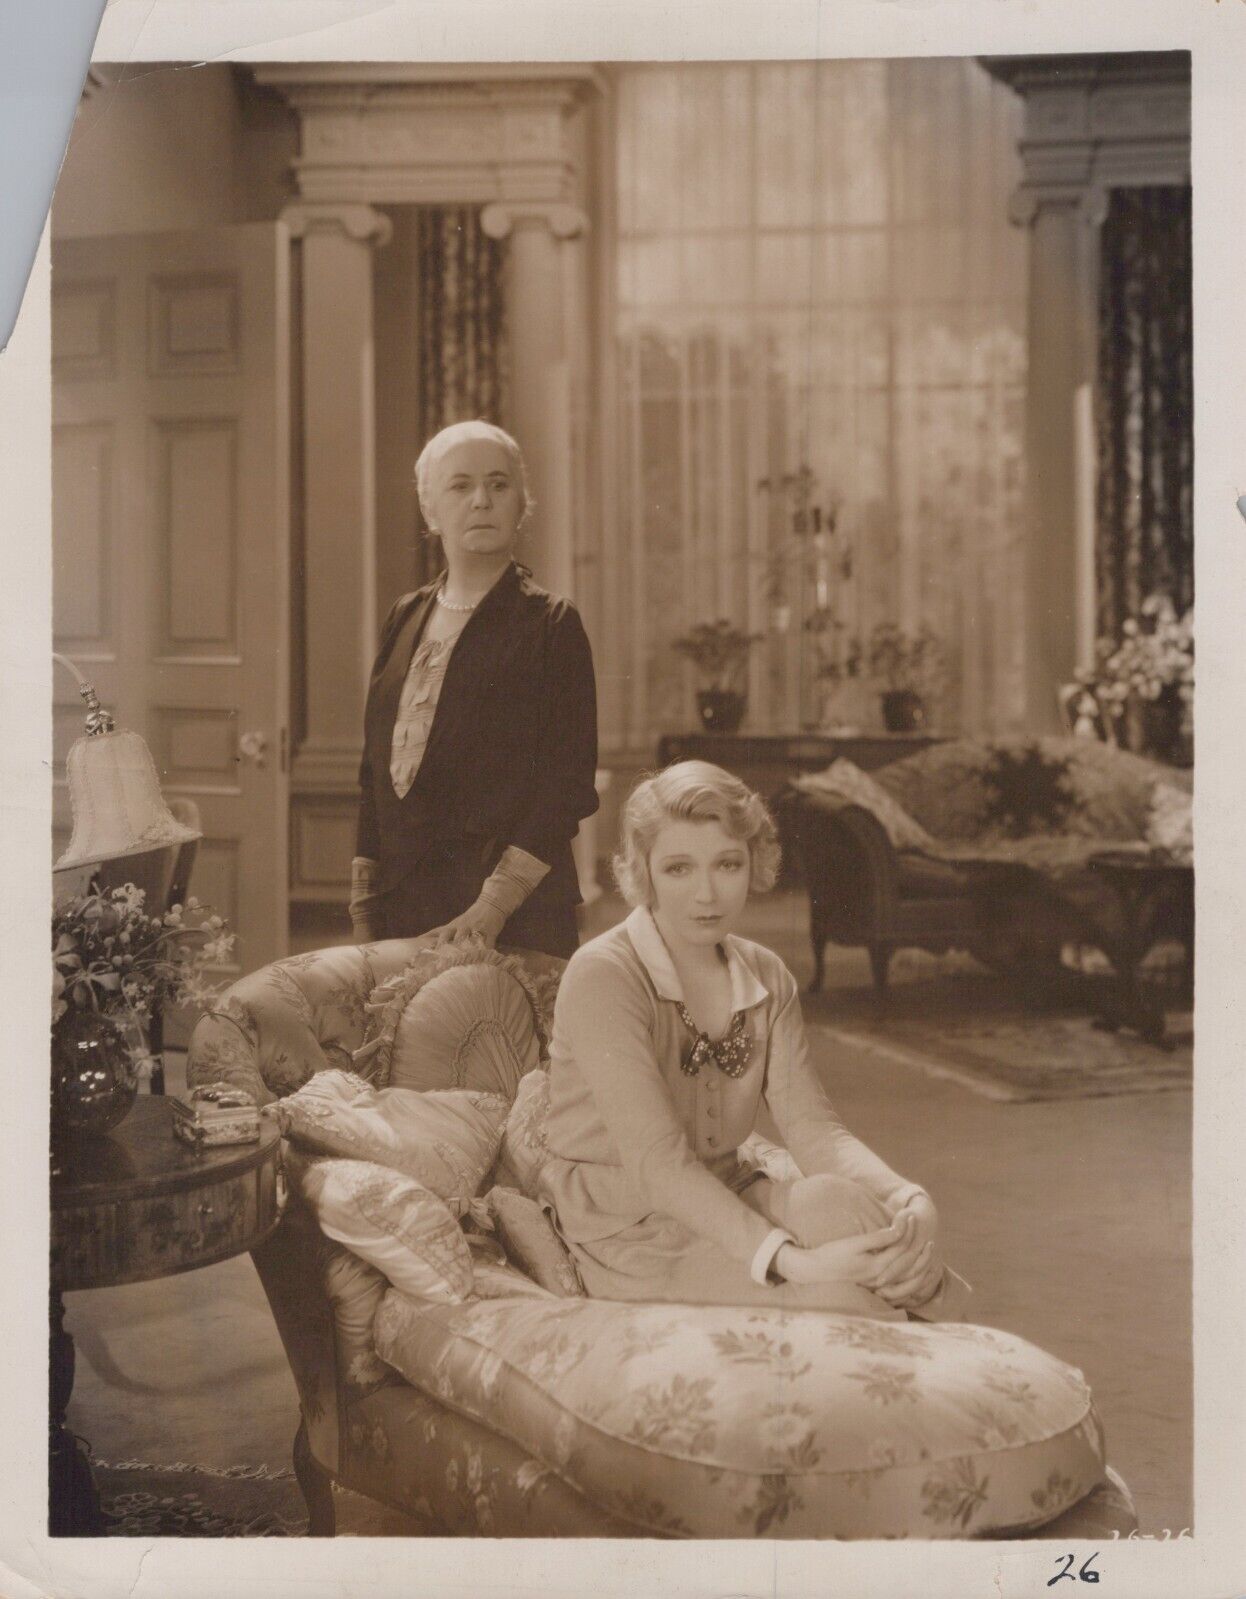 Ina Claire + Louise Closser Hale in Rebound (1931) ❤ Vintage Photo K 372